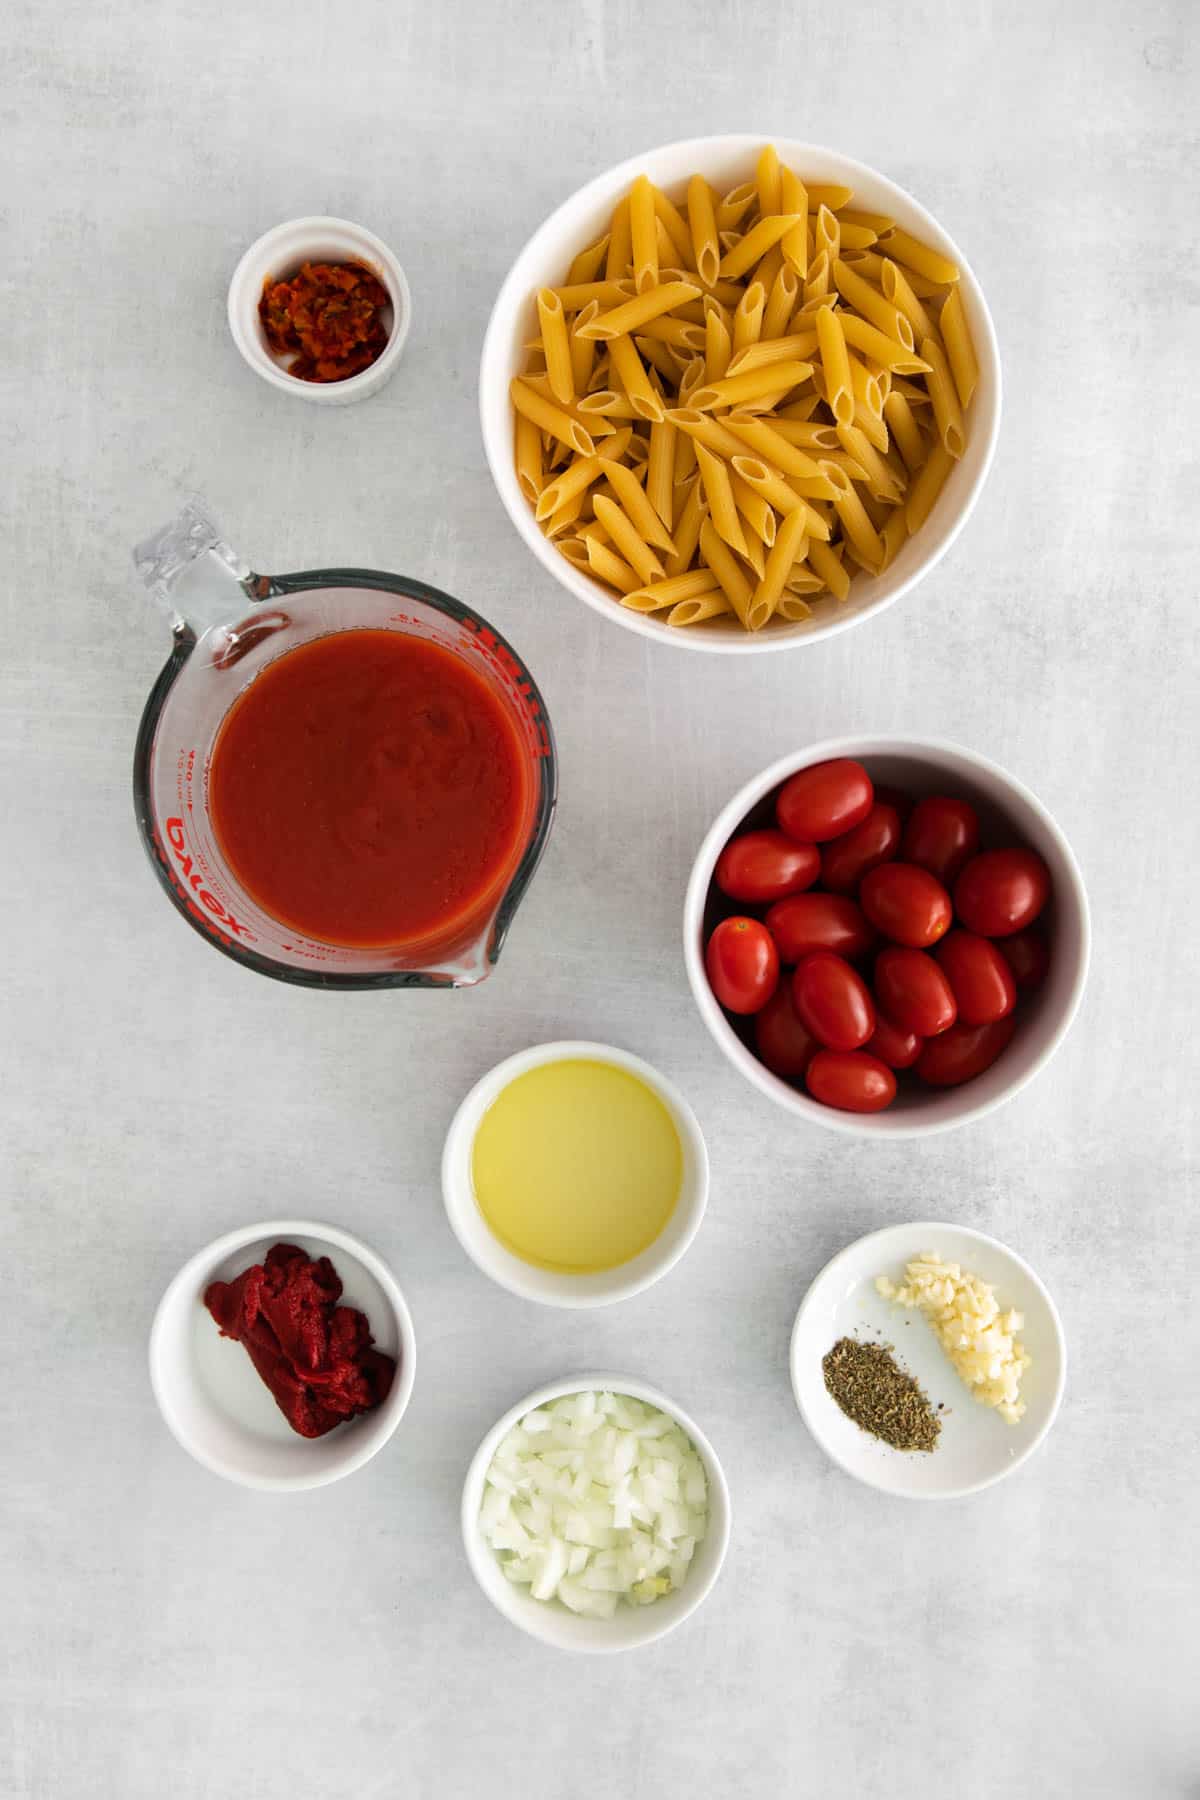 Ingredients for making penne all'arrabbiata in separate bowls.